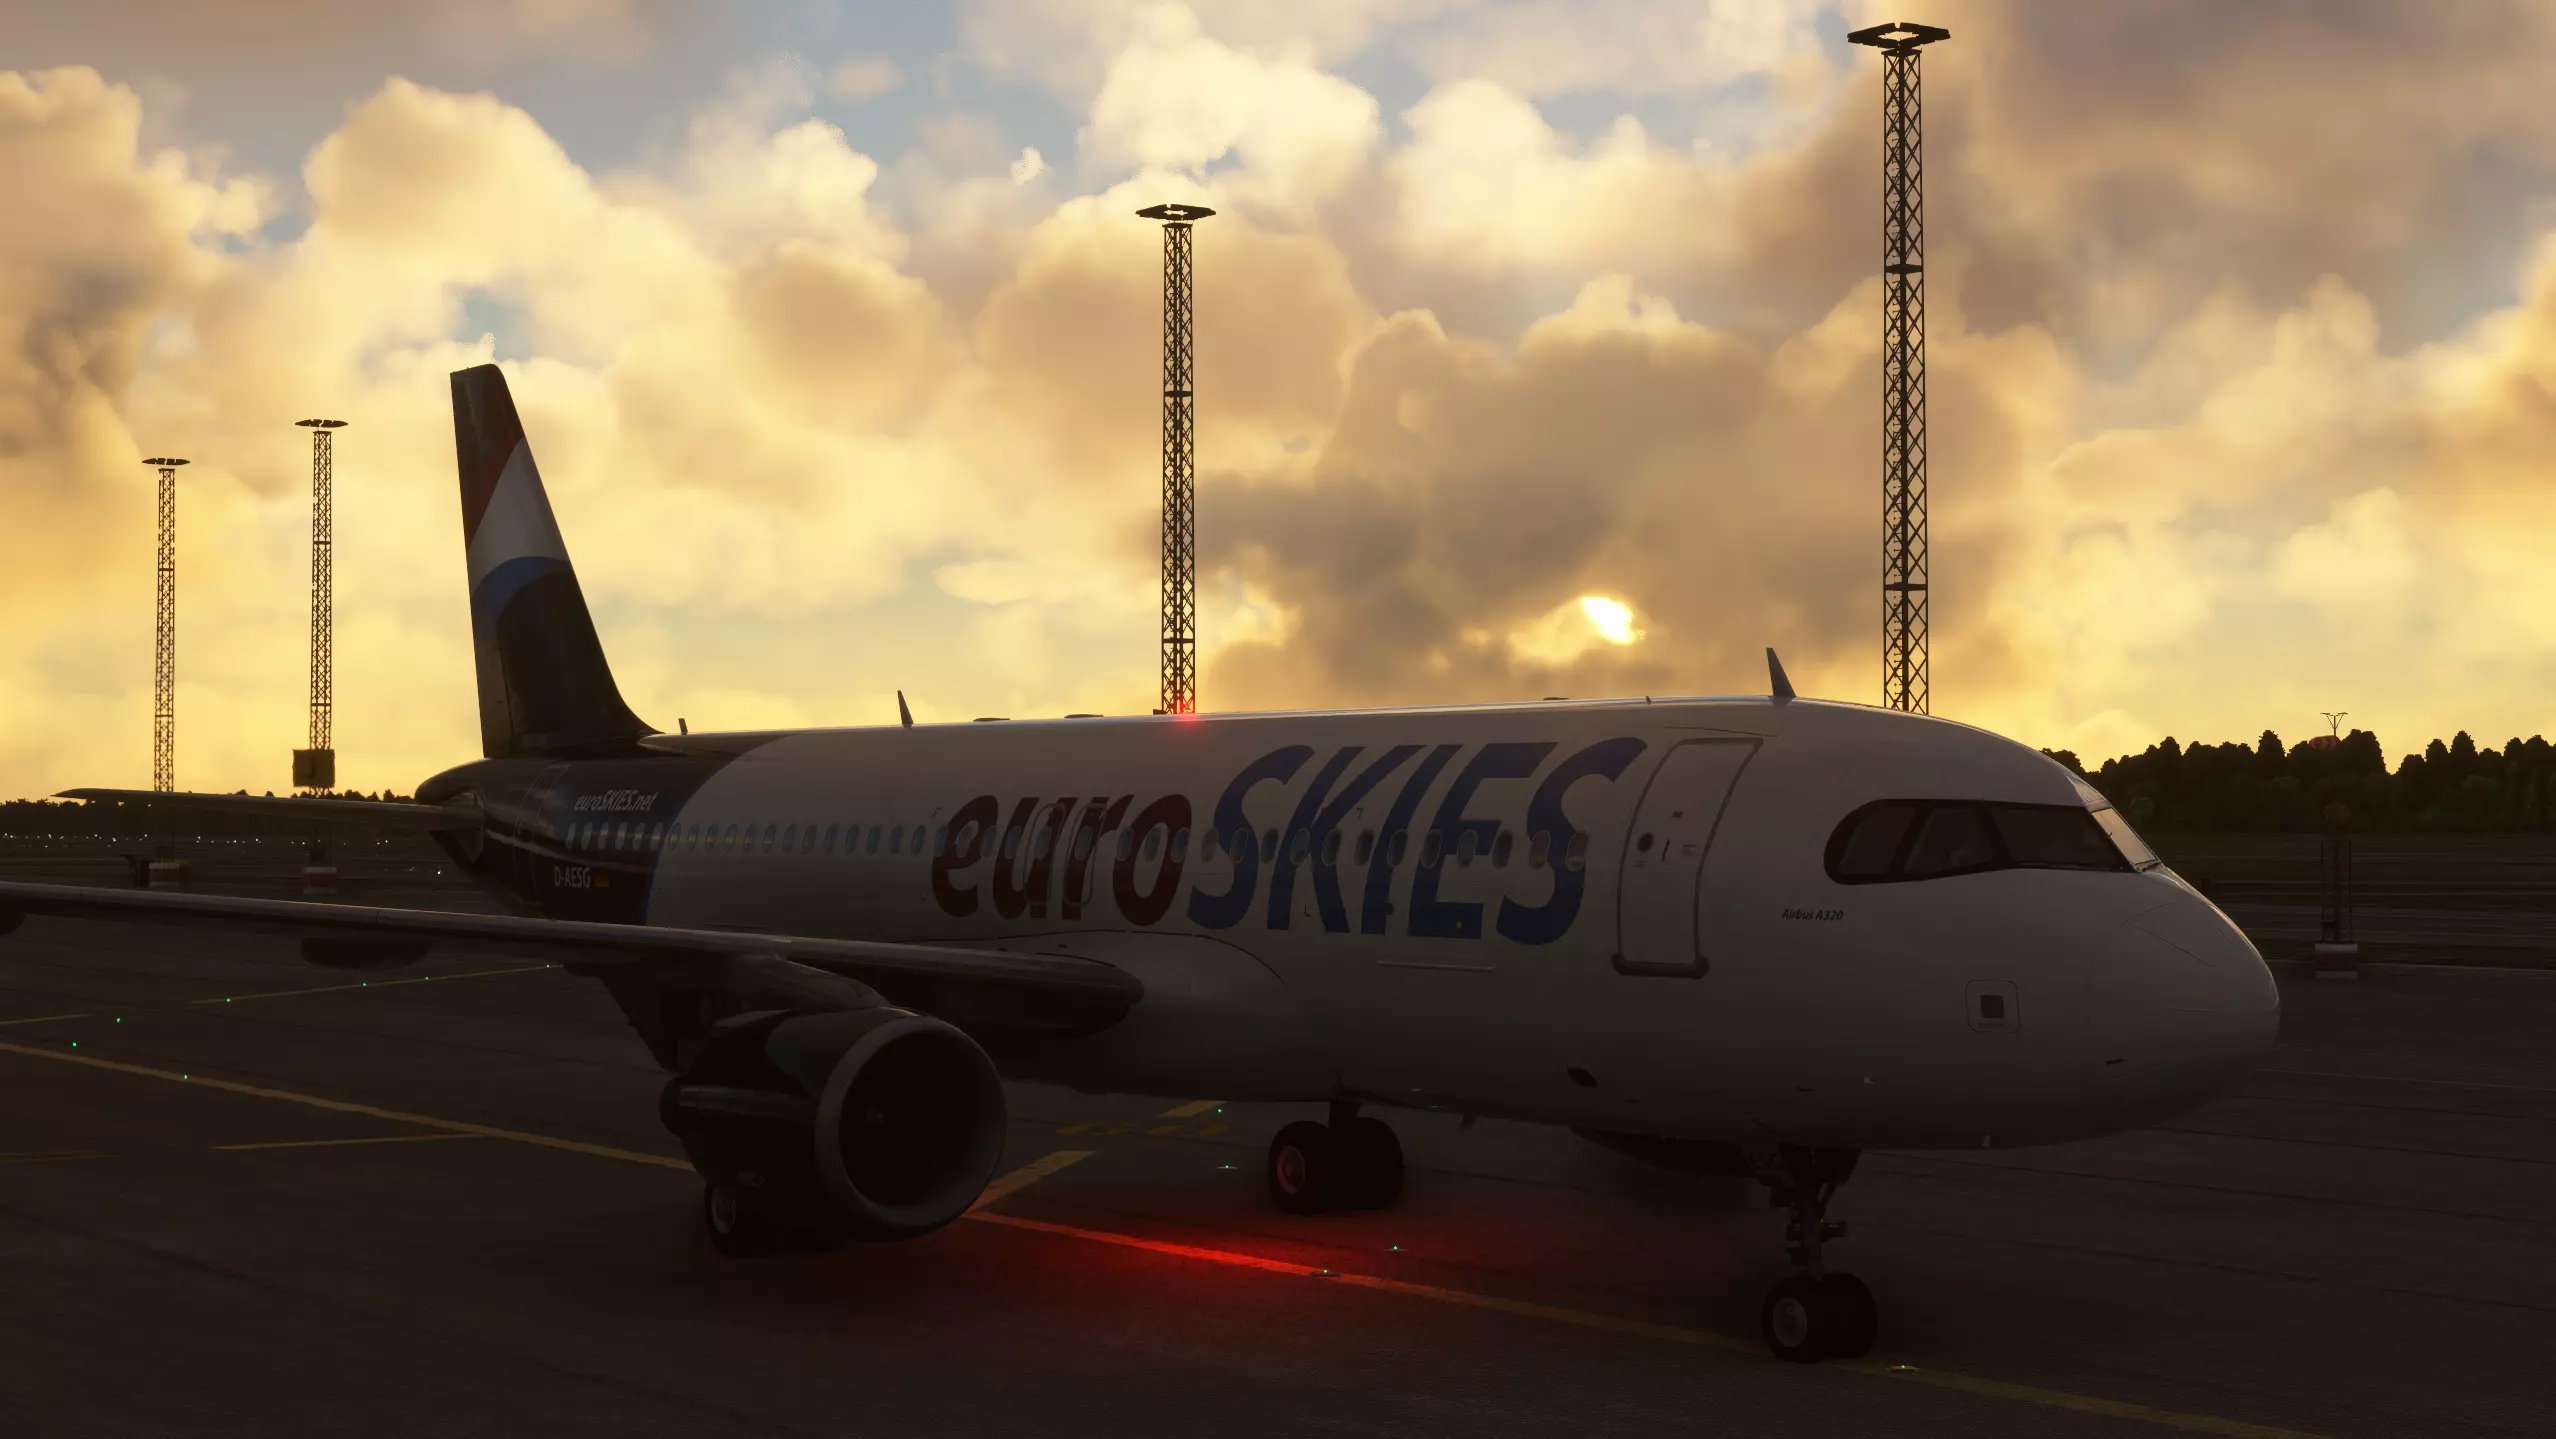 euroSKIES virtual airline A320 taxiing in sunset 